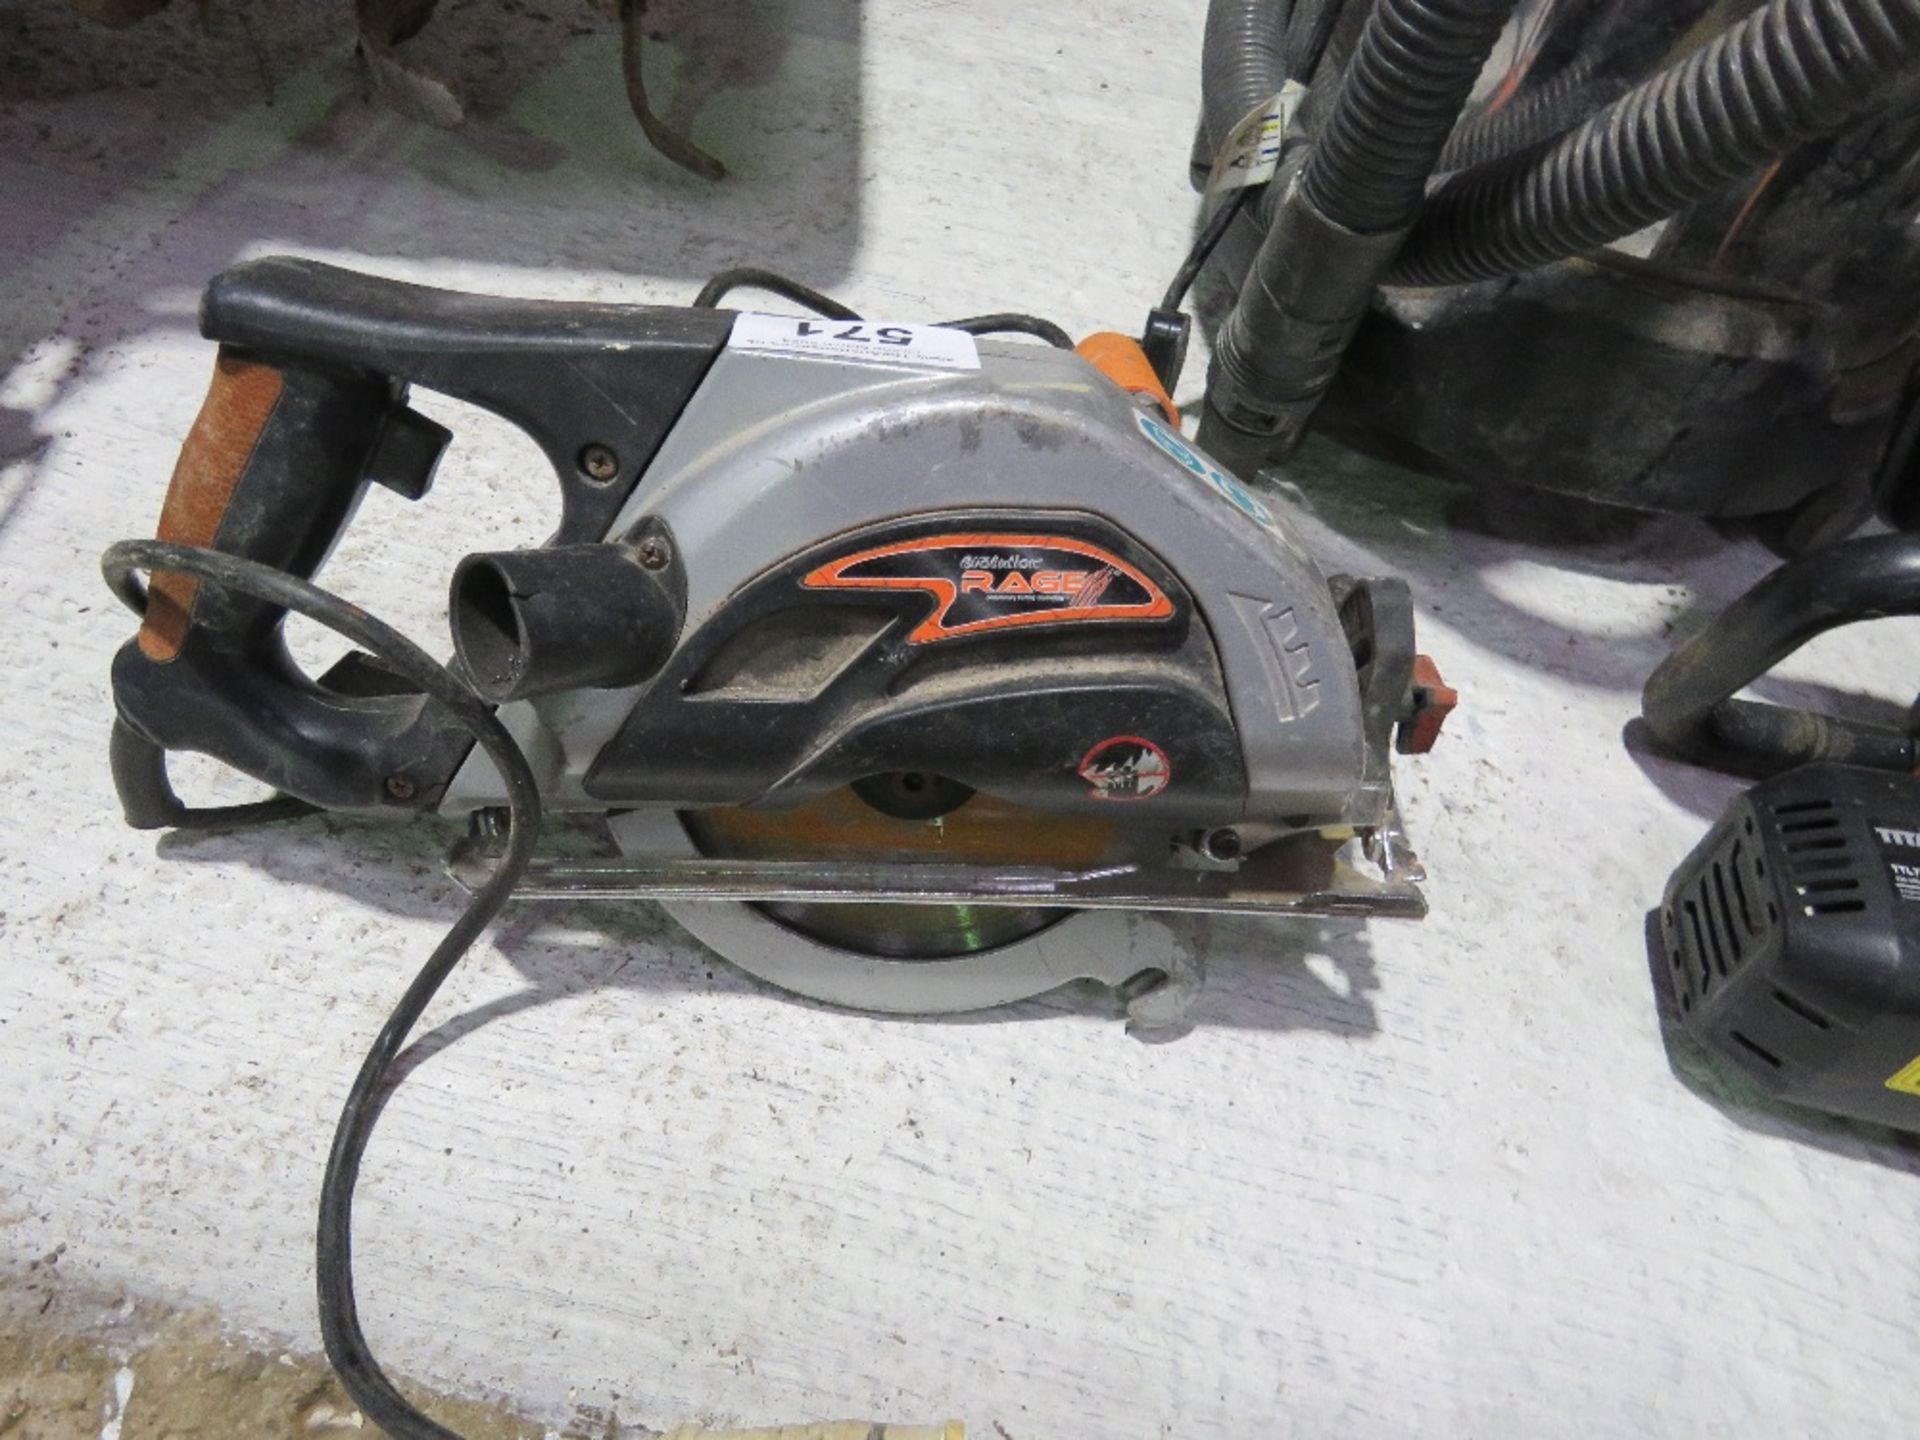 EVOLUTION 110VOLT METAL CUTTING CIRCULAR SAW. DIRECT FROM LOCAL RETIRING BUILDER. THIS LOT IS S